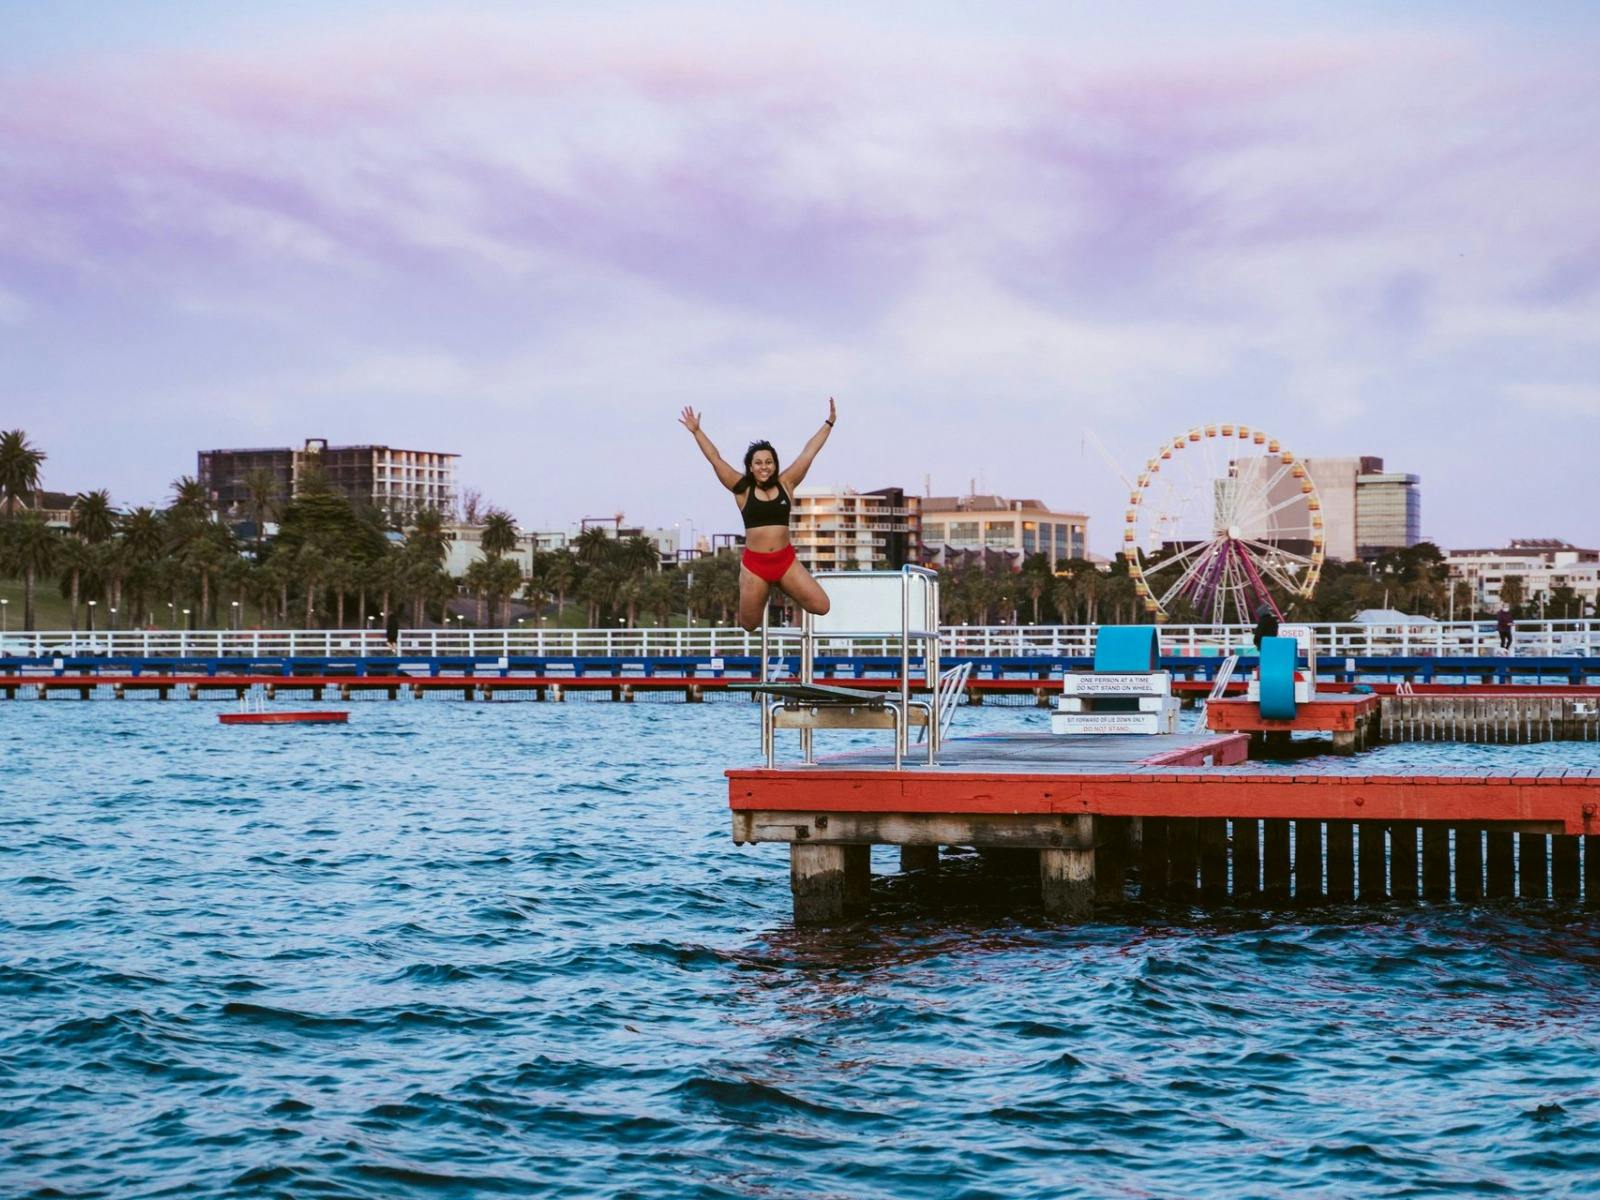 Girl jumping off the dock into the water with hands up in the air